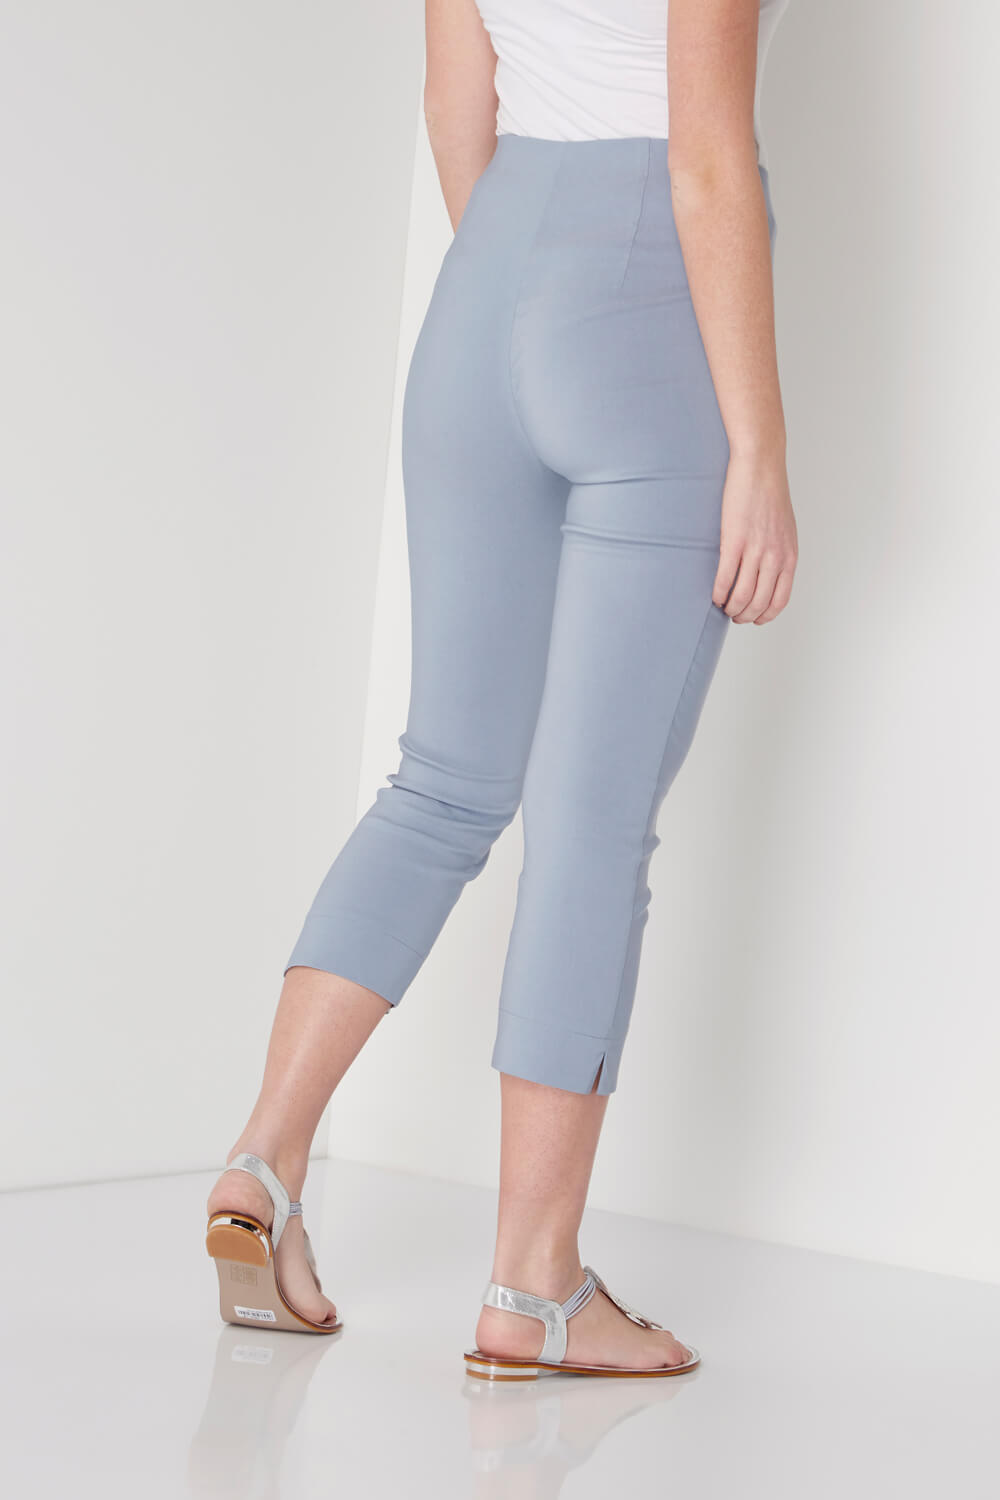 Grey Cropped Stretch Trouser, Image 2 of 4